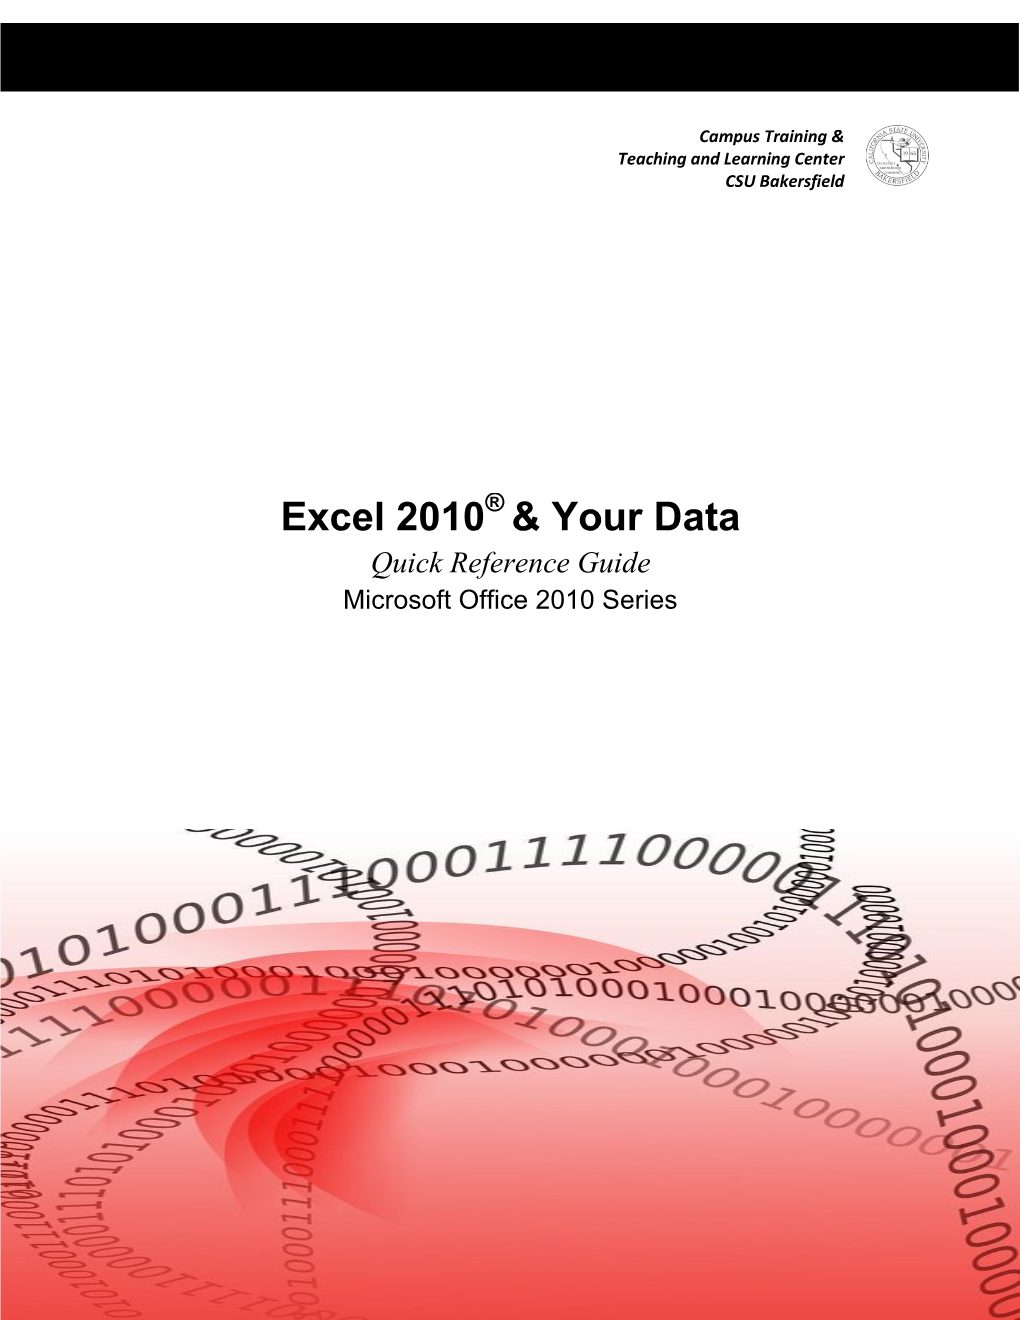 W2010 Excel 2010 & Your Data